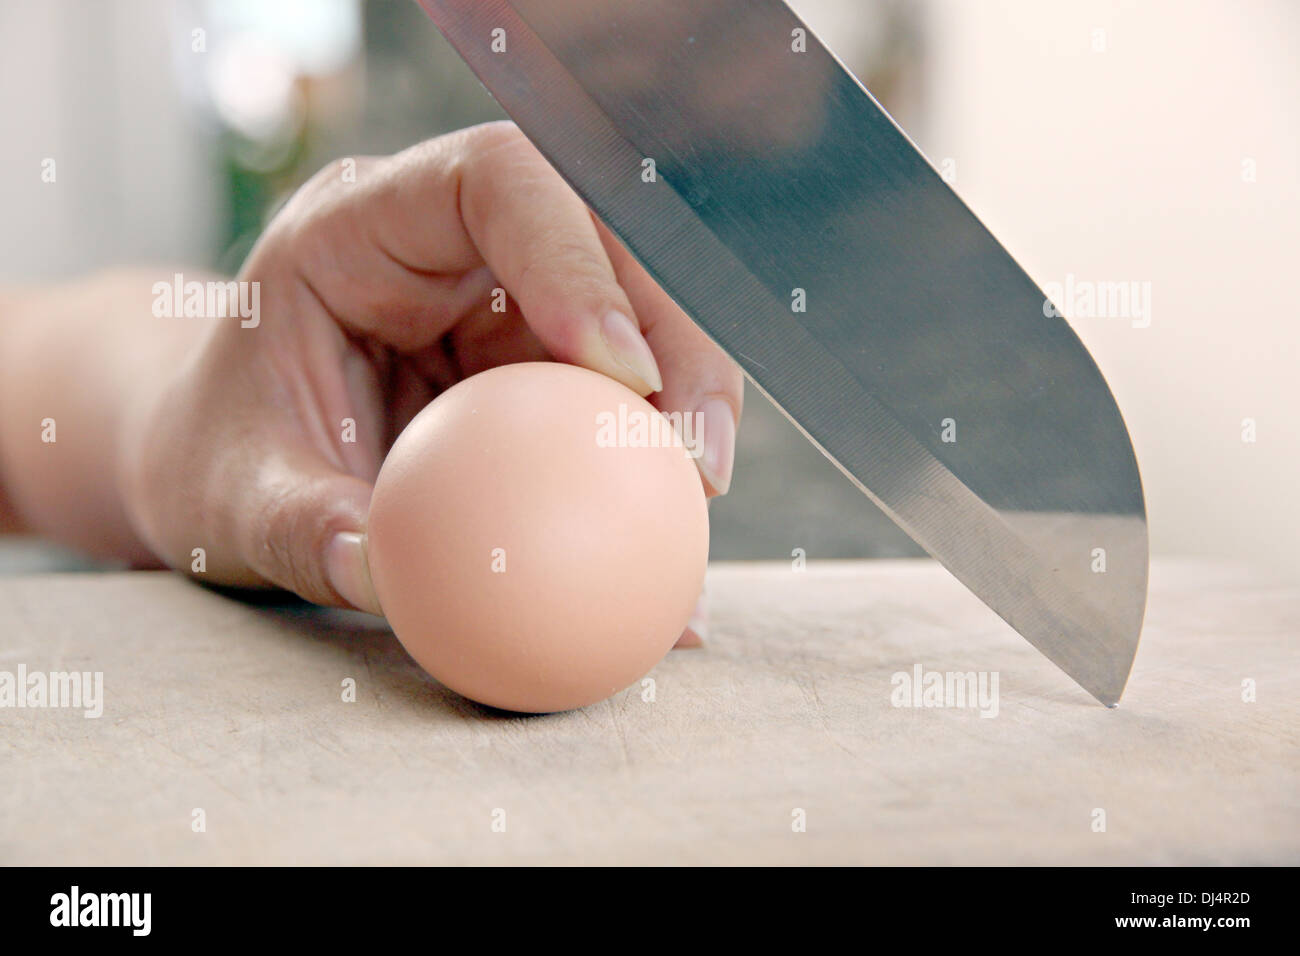 Hand that holds a knife and Eggs that are about to sliced. Stock Photo